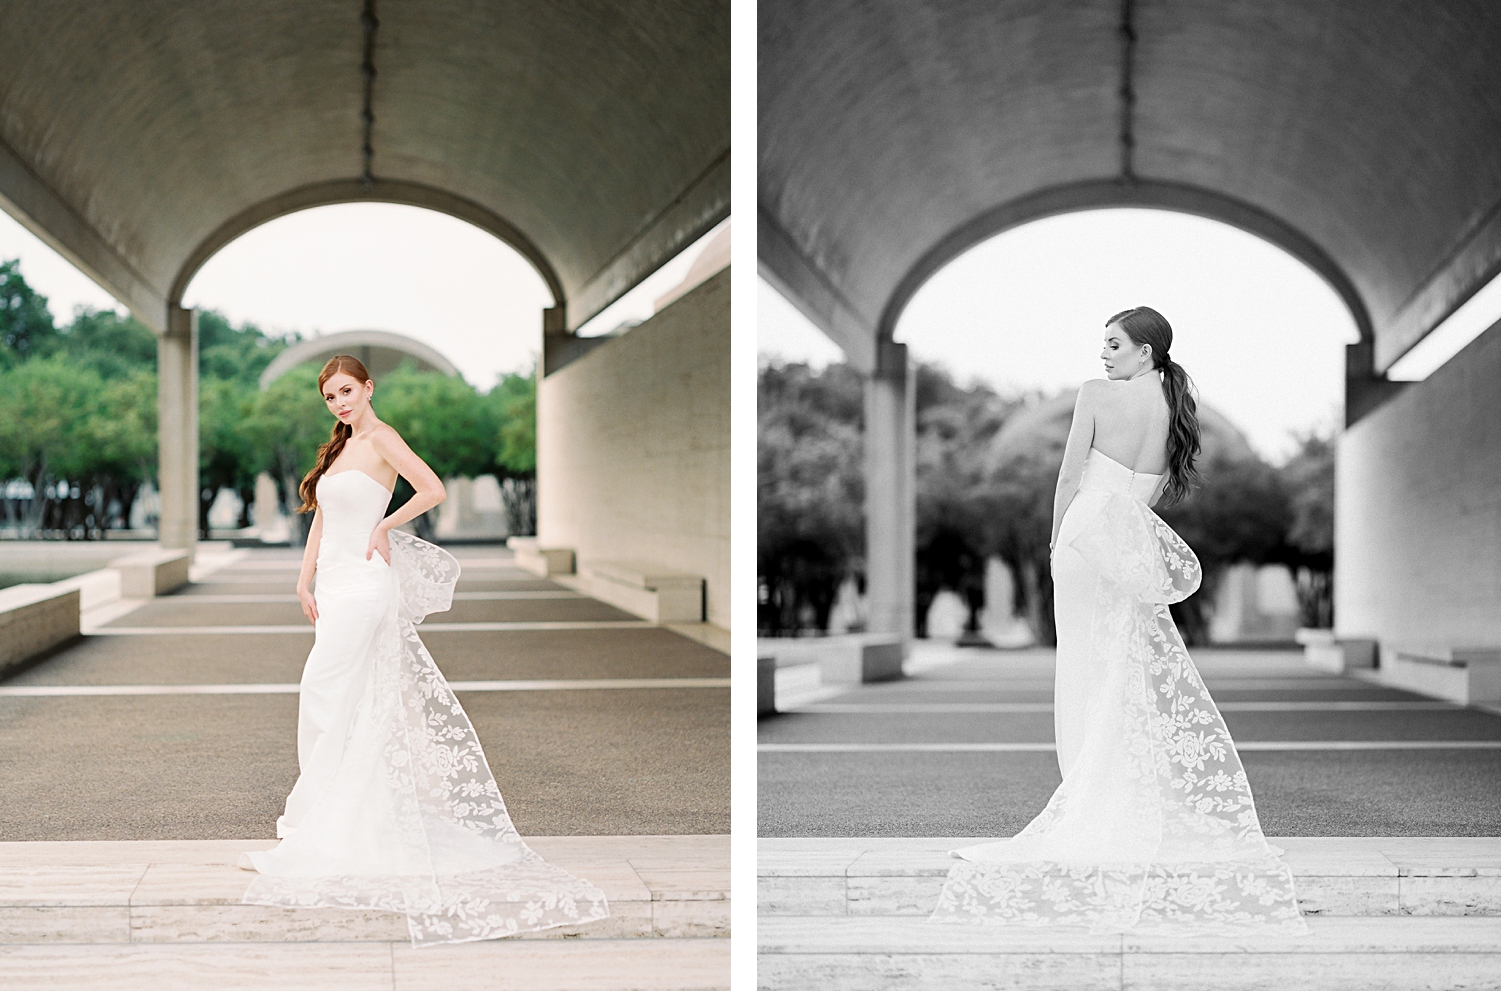 red headed bride in white Sareh Nouri bridal gown with lace bow standing under concrete awning